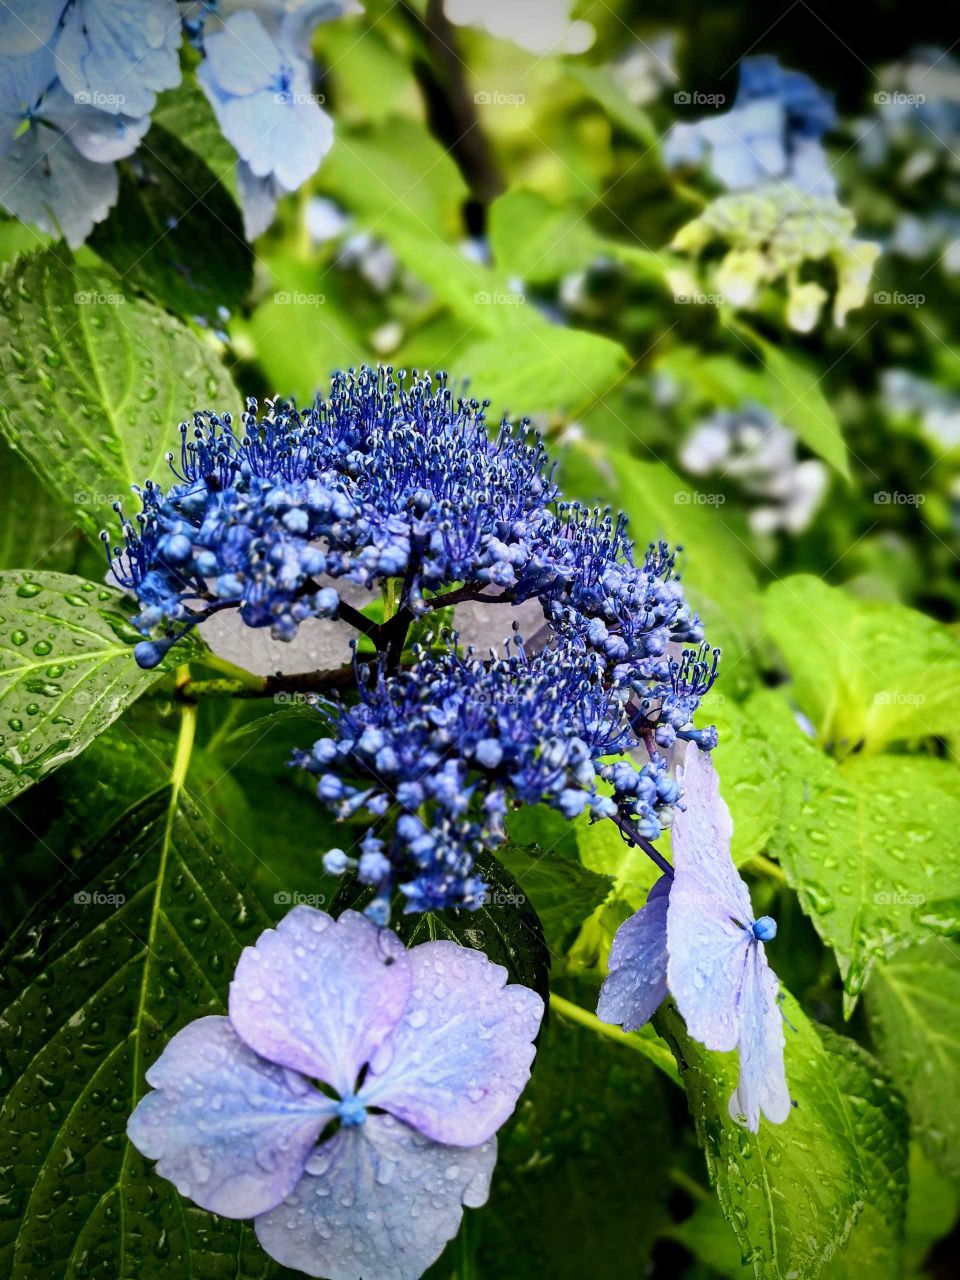 Blue Flower around green leaves after rain